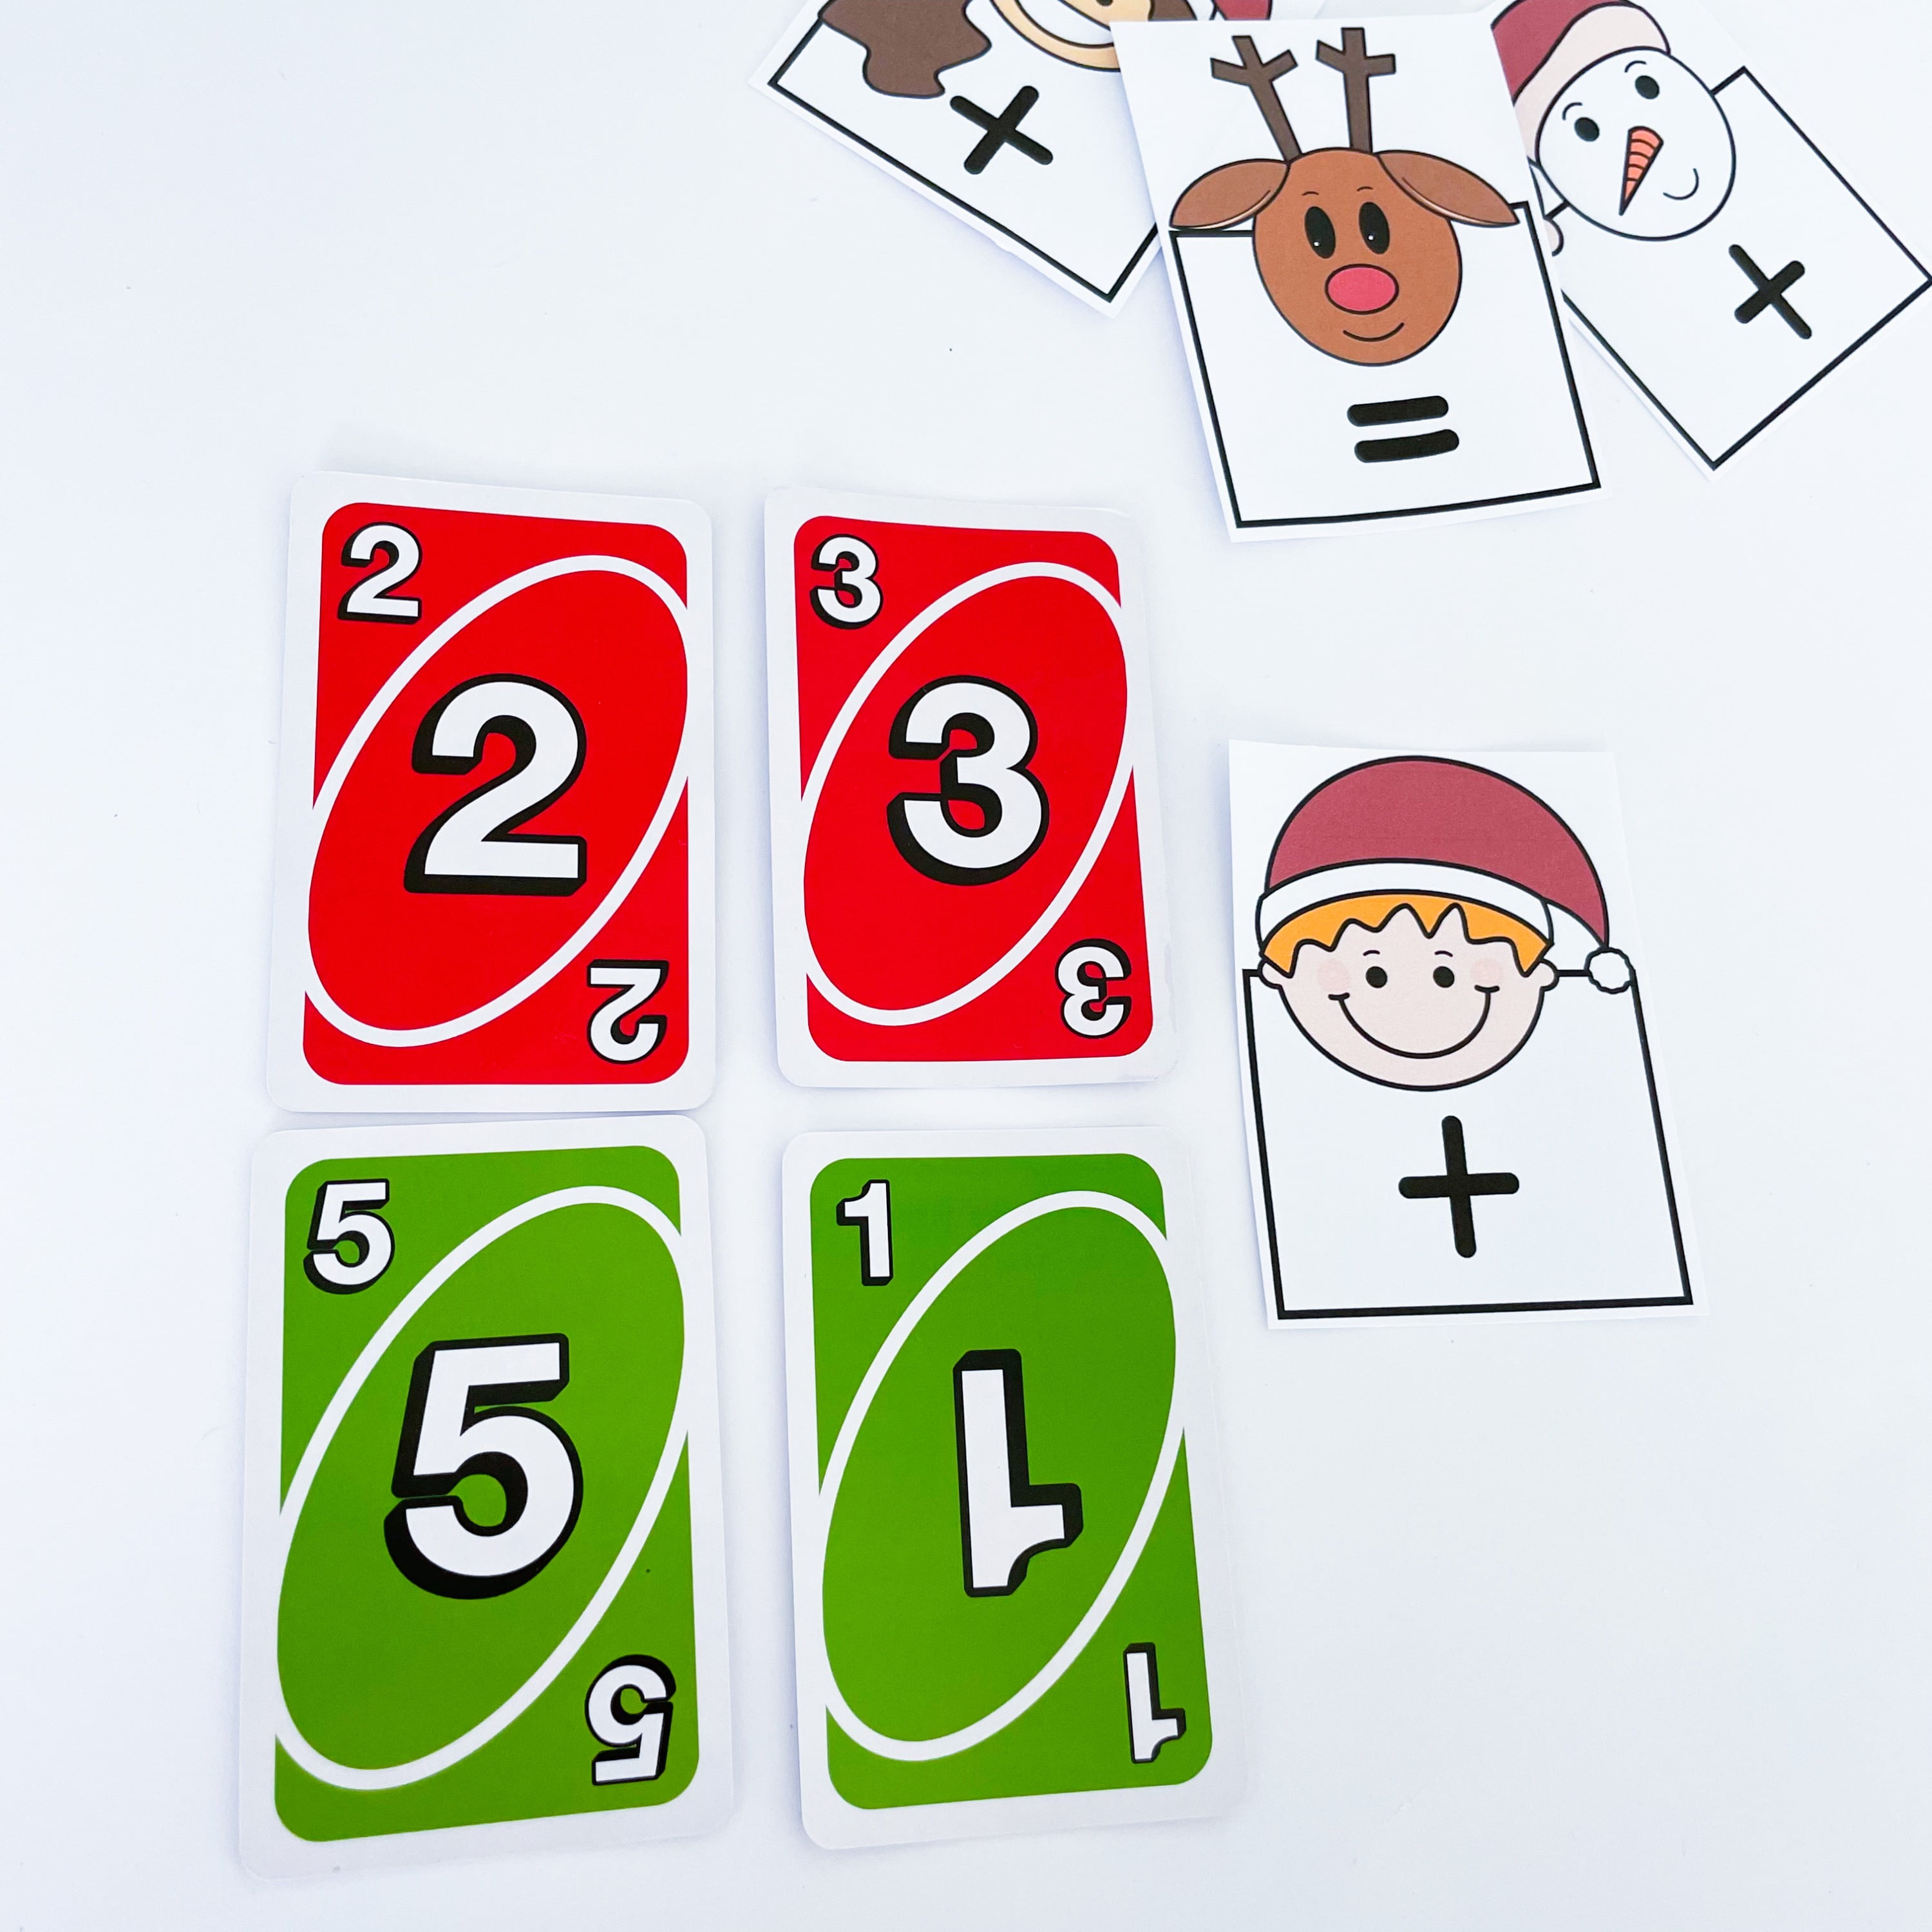 Christmas themed card games to play in maths lessons
